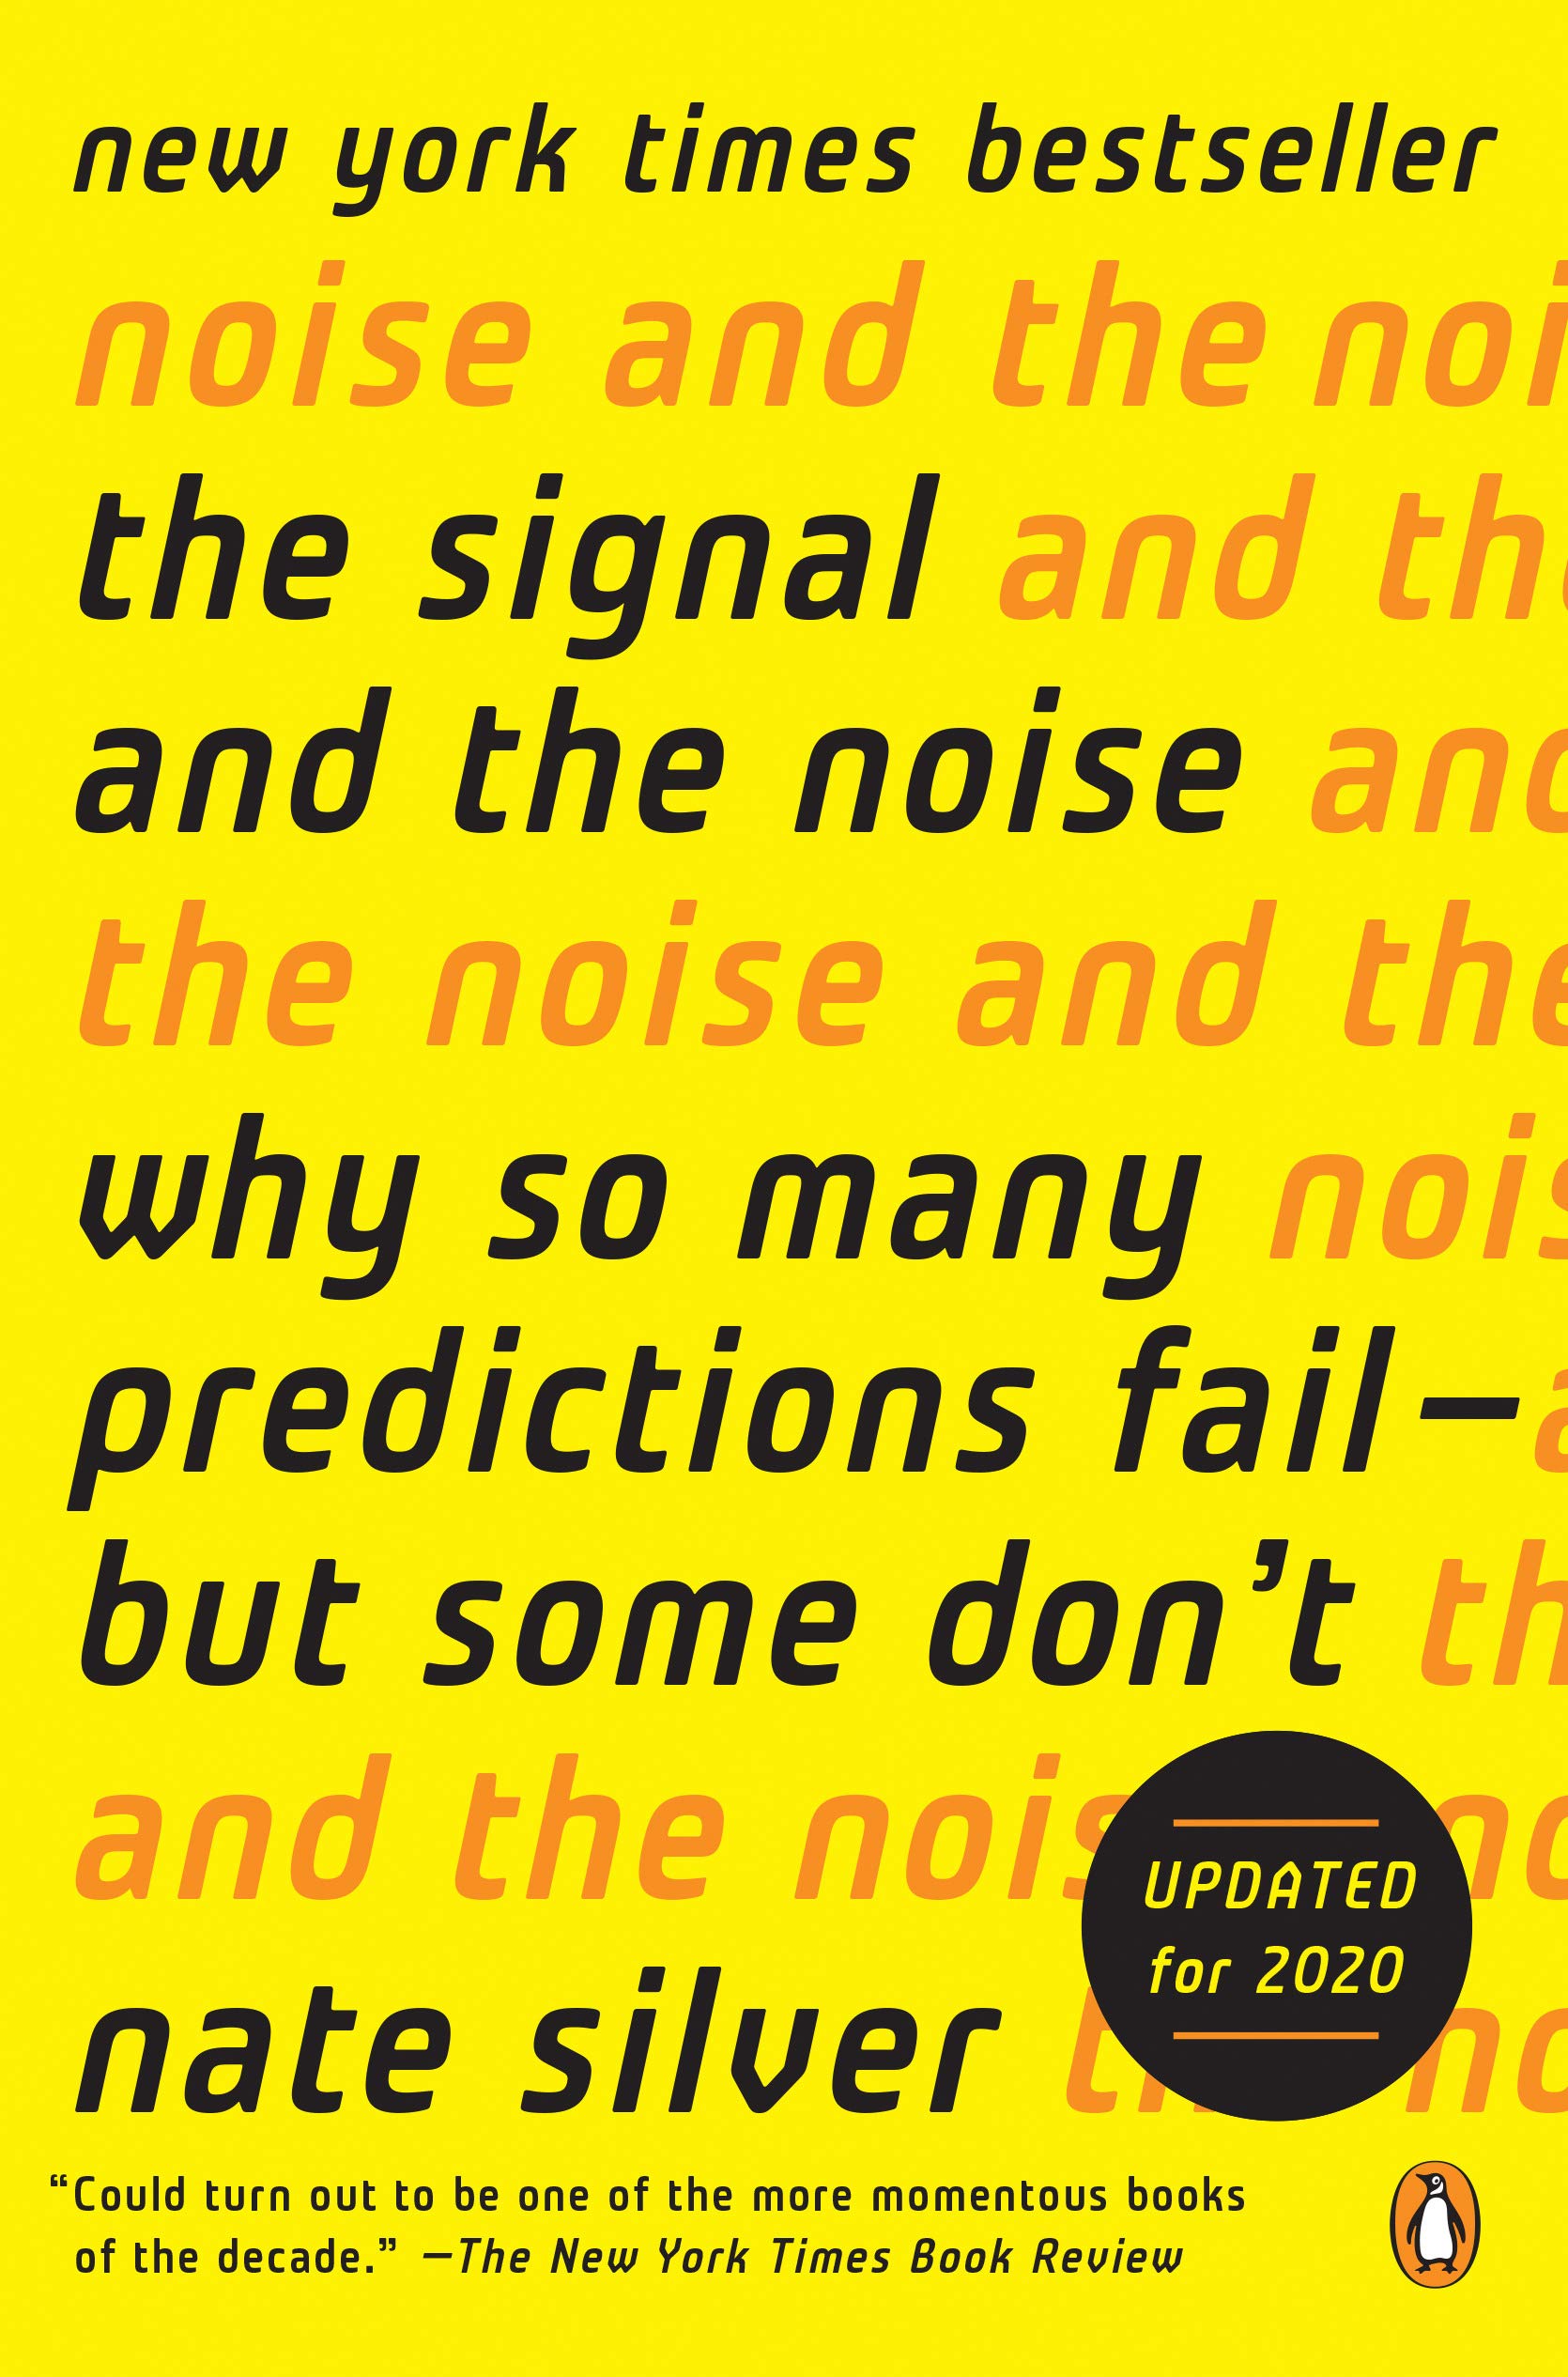 The Signal and the Noise: Why So Many Predictions Fail-but Some Don't (eBook) by Nate Silver $1.99